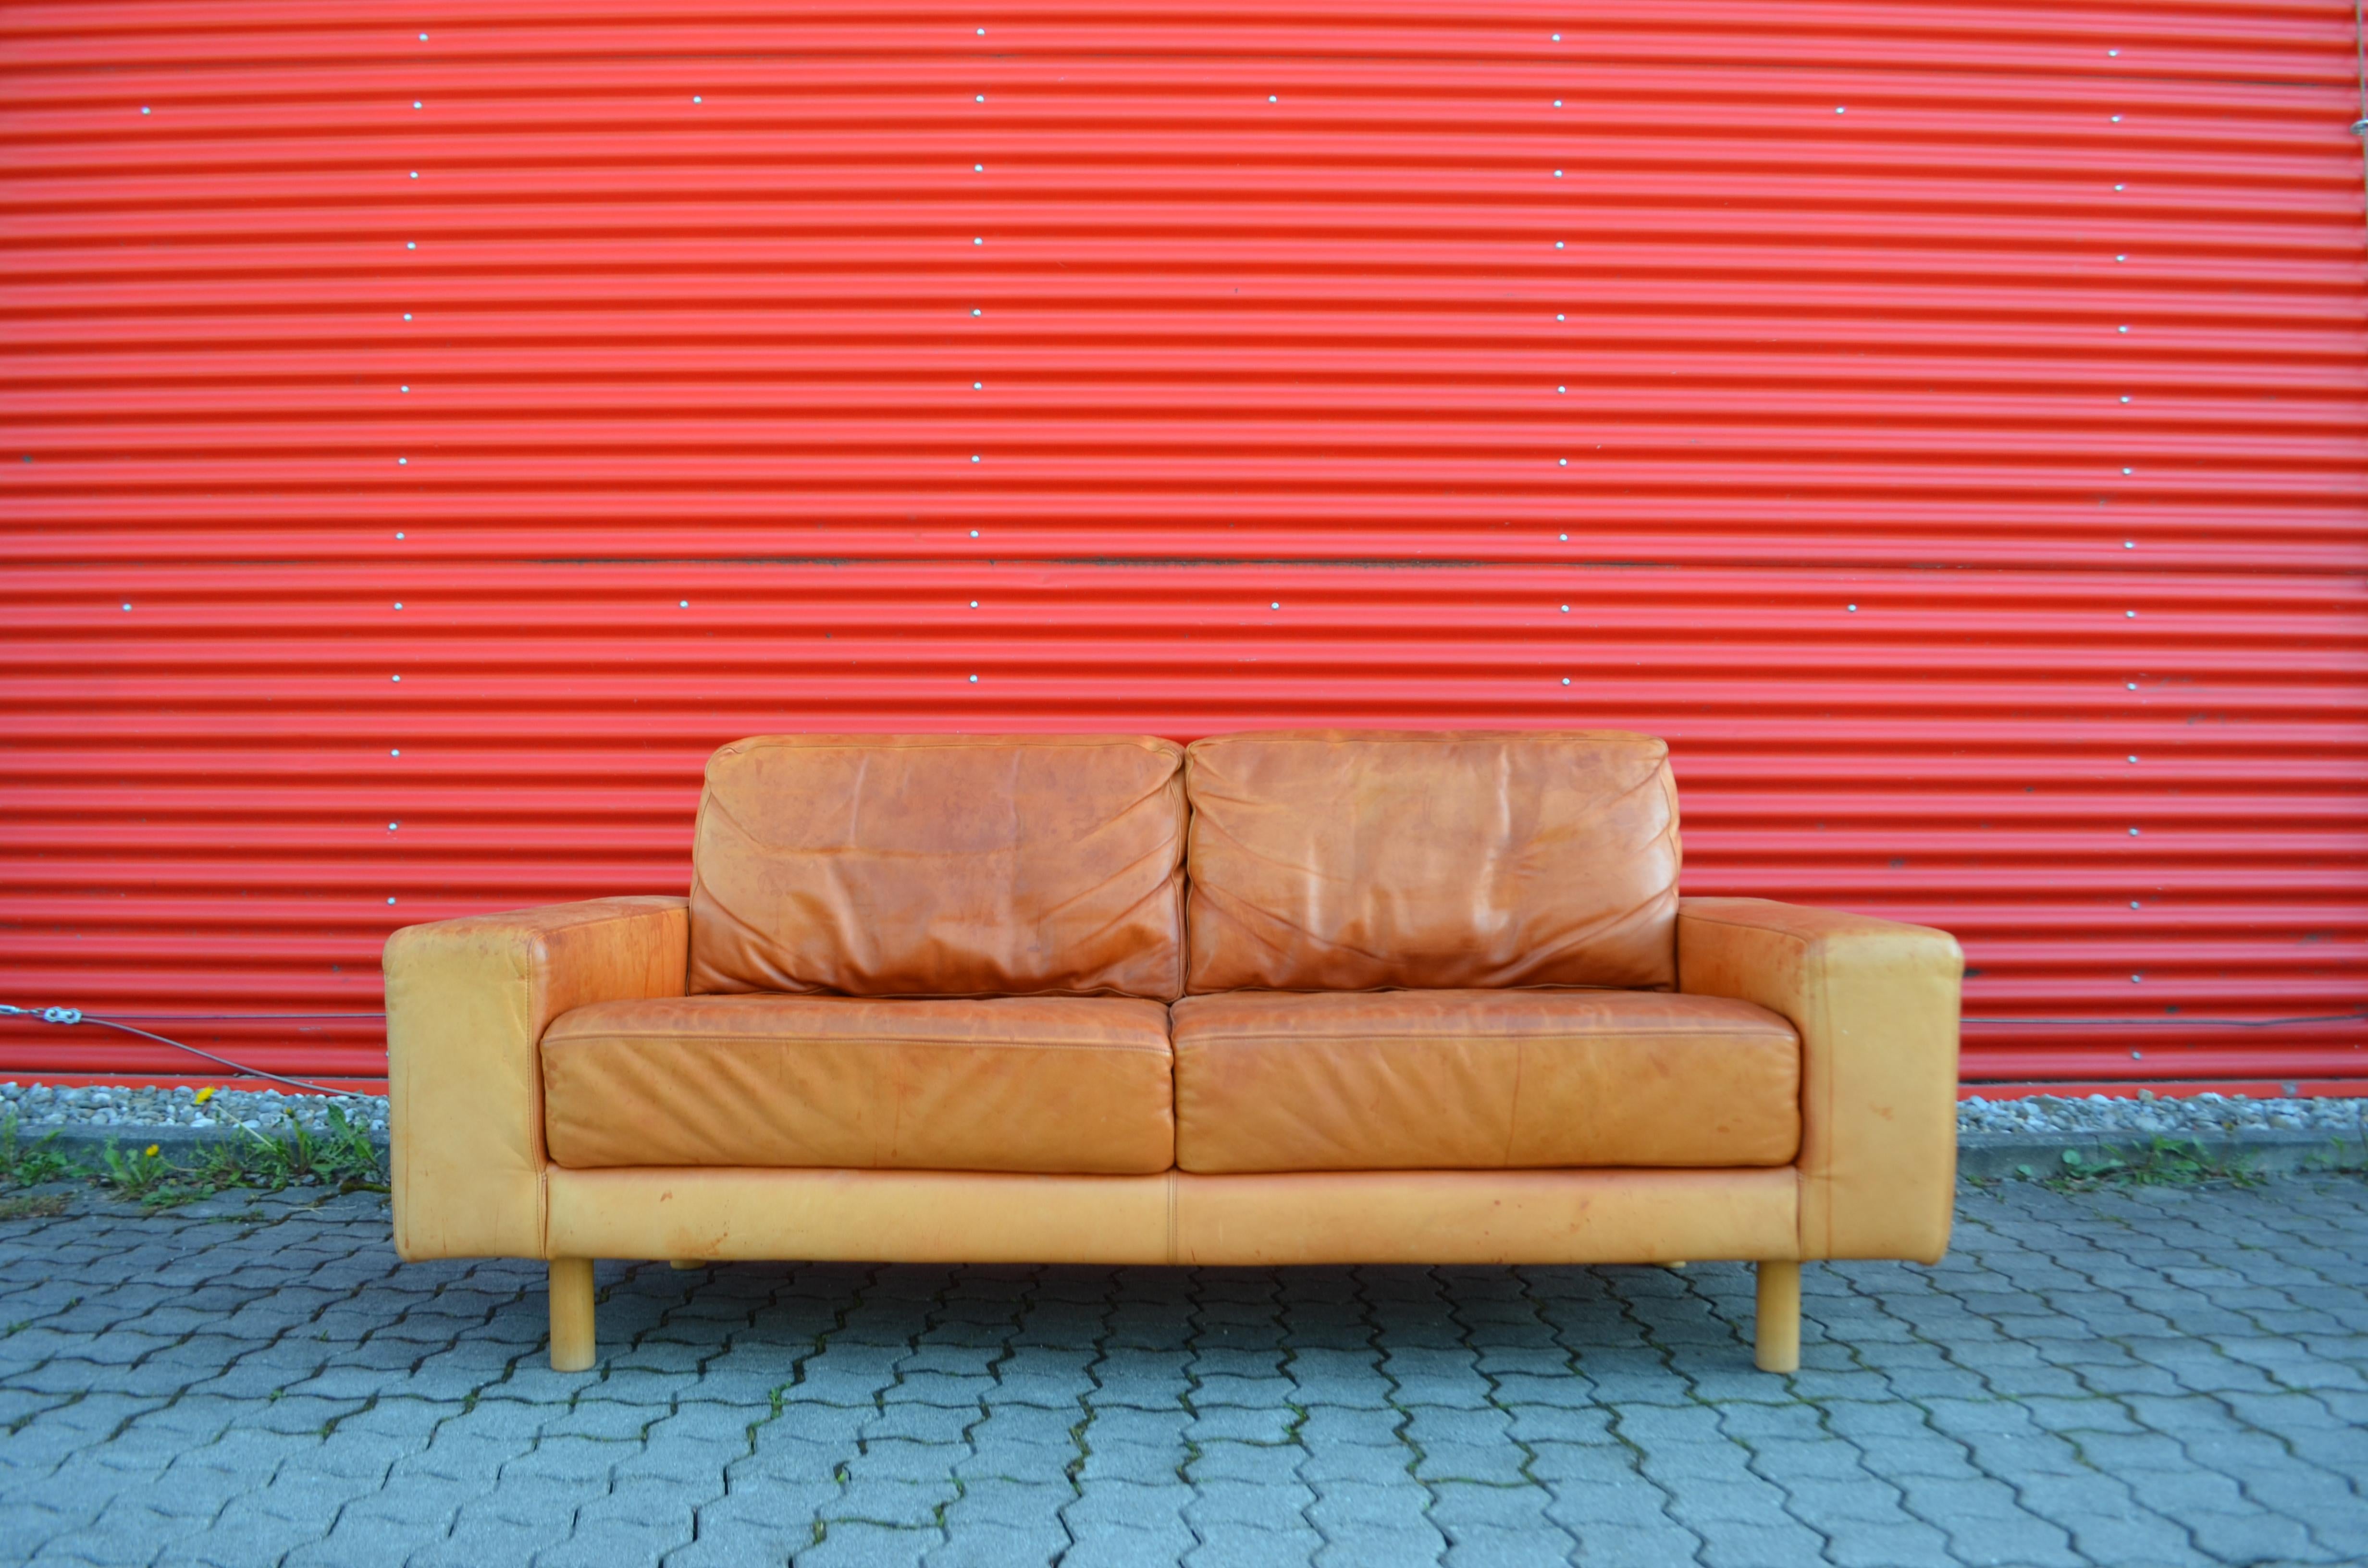 Gorgeous vintage Danish modern leather sofa.
The cognac leather has a rich stunning patina with lot signs of use during the age.
The leather looks like vegetal leather but it is a fine aniline leather with a great touch.
Some little cat scratches on